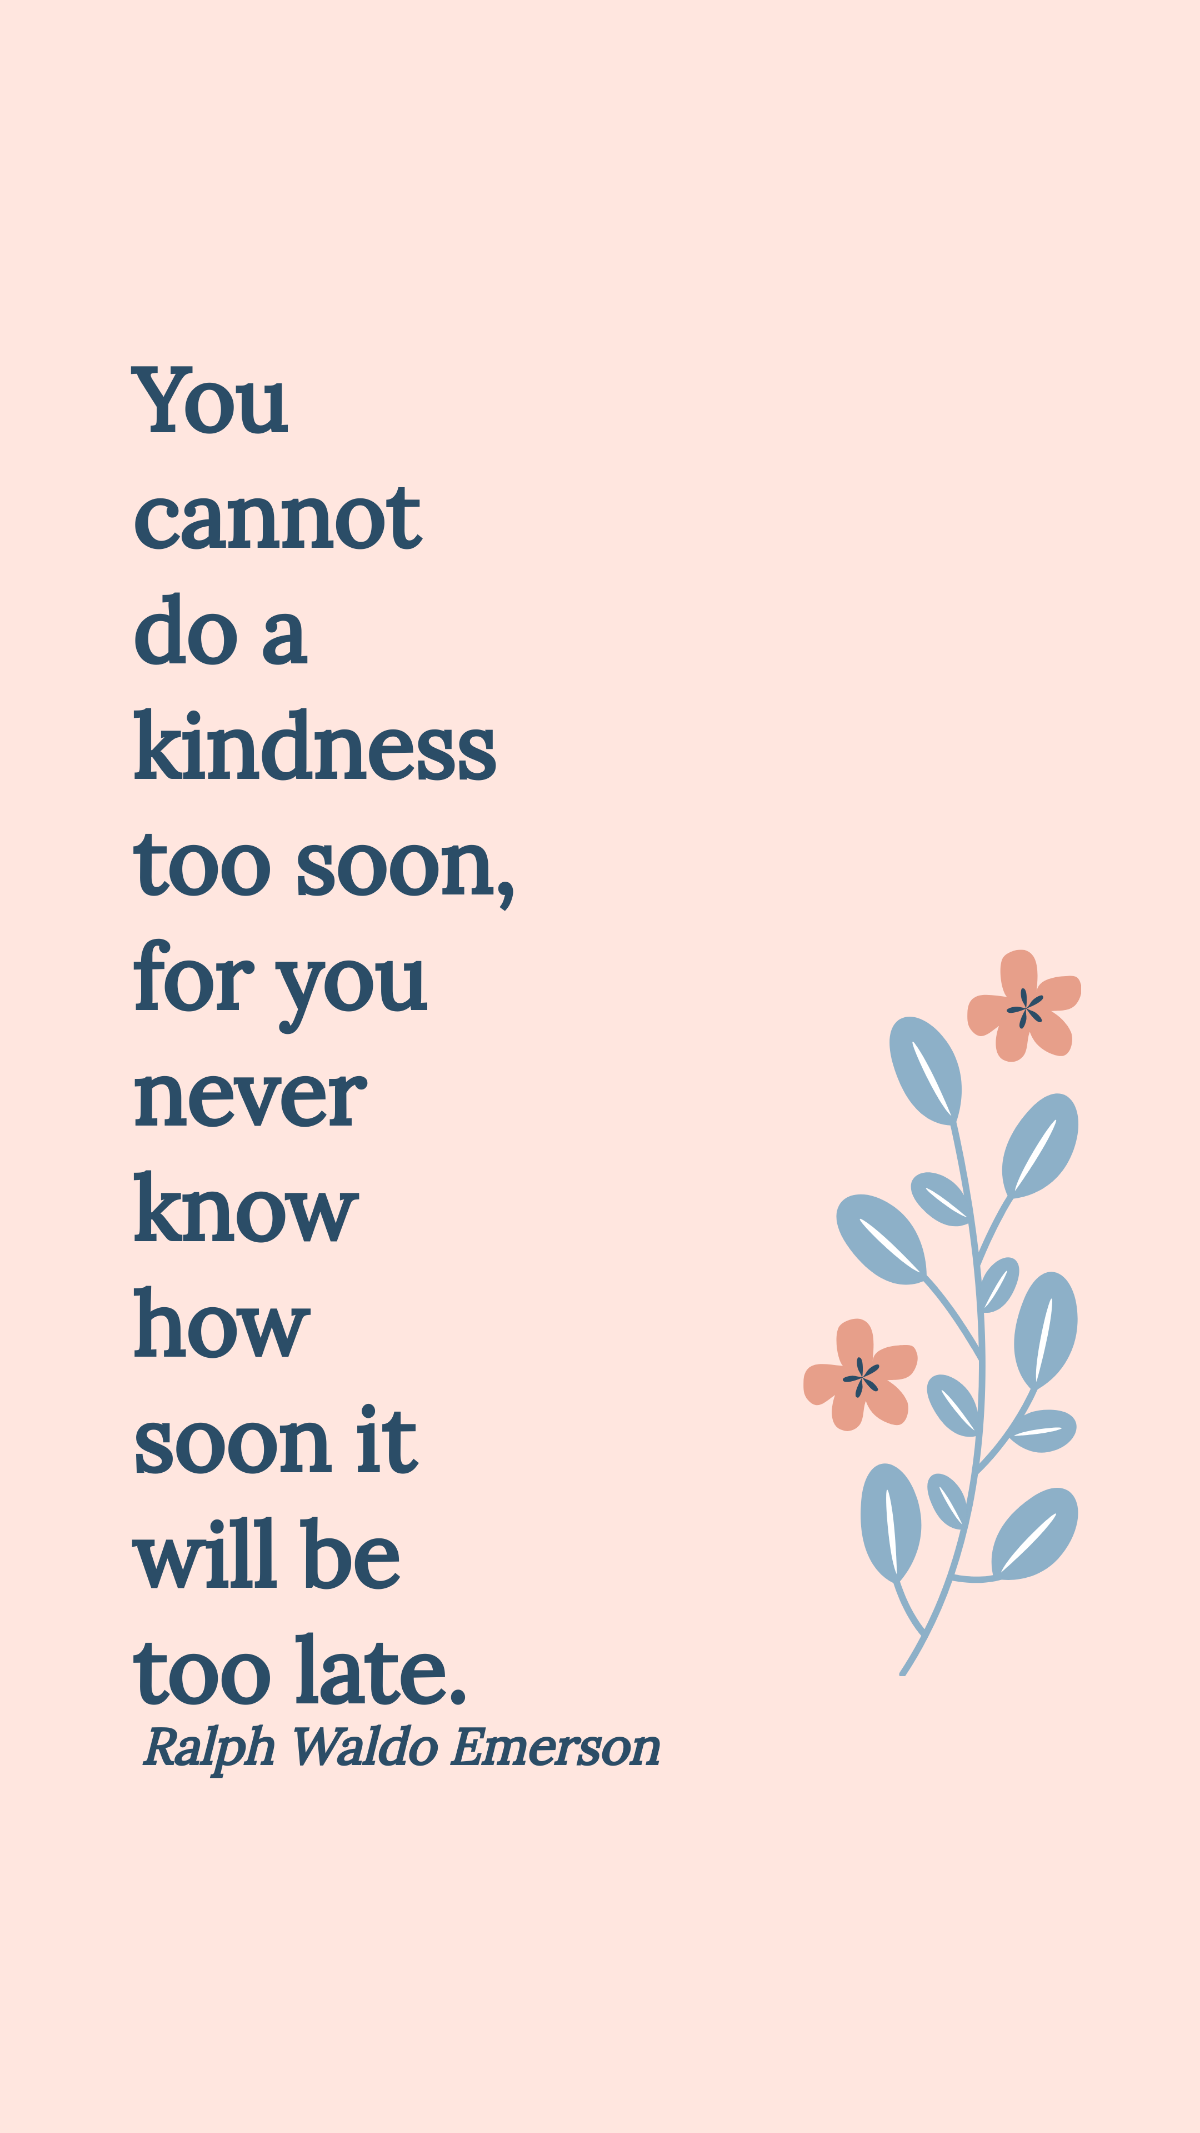 Ralph Waldo Emerson - You cannot do a kindness too soon, for you never know how soon it will be too late. Template